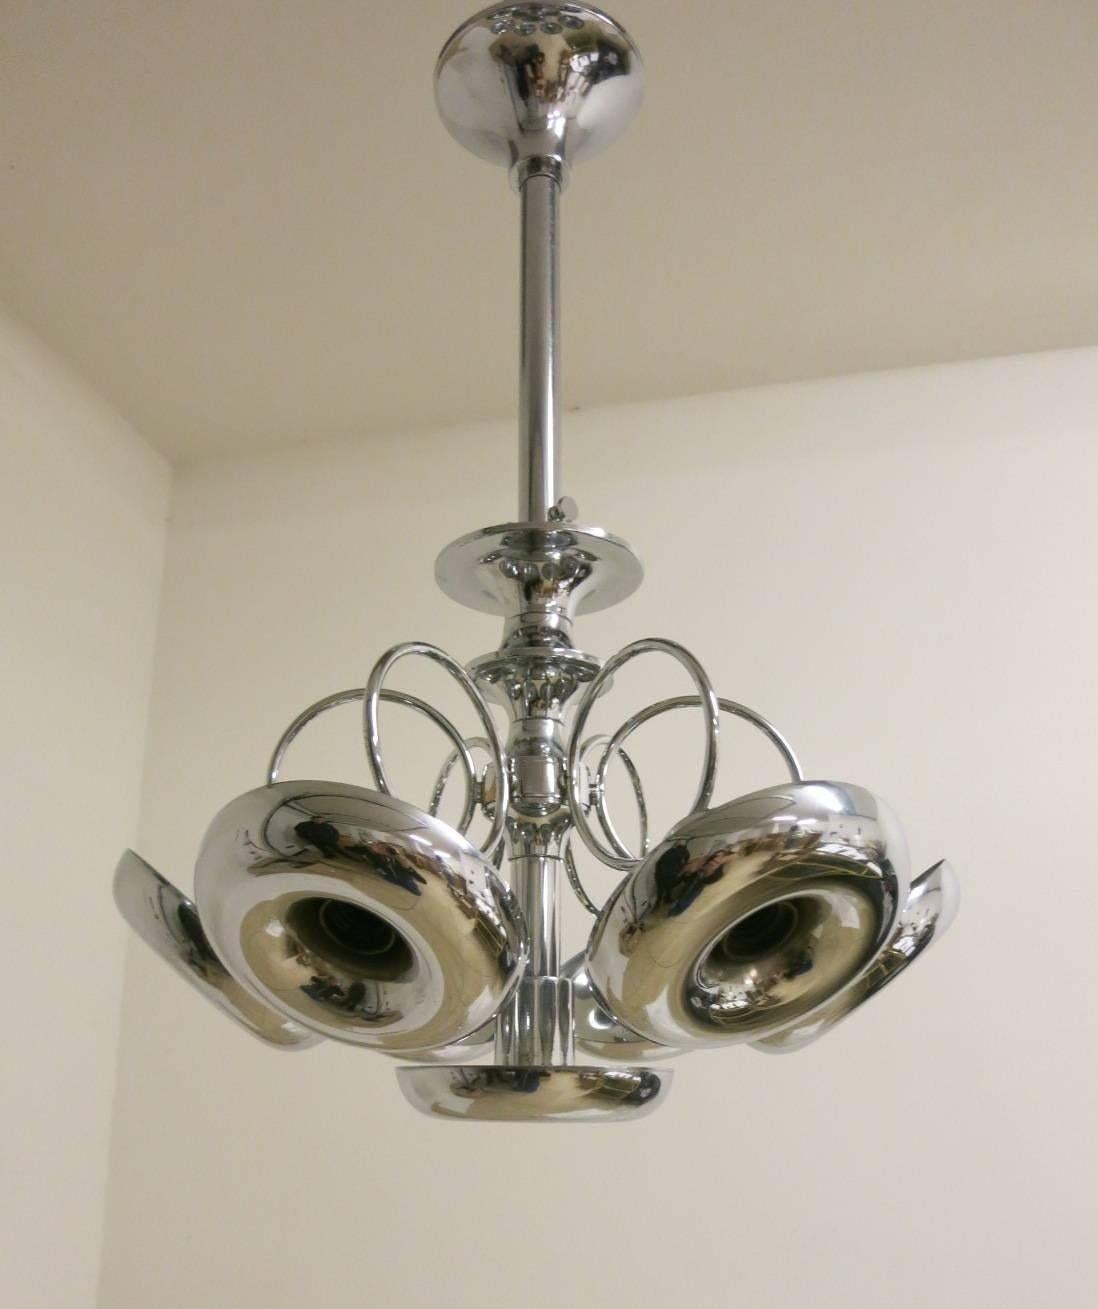 Vintage Italian chrome pendant with seven trumpet-like shapes and spiraled design. Made in Italy by Sciolari, c. 1960's. 
*Already rewired to fit US Lighting Standard
Dimensions:
30